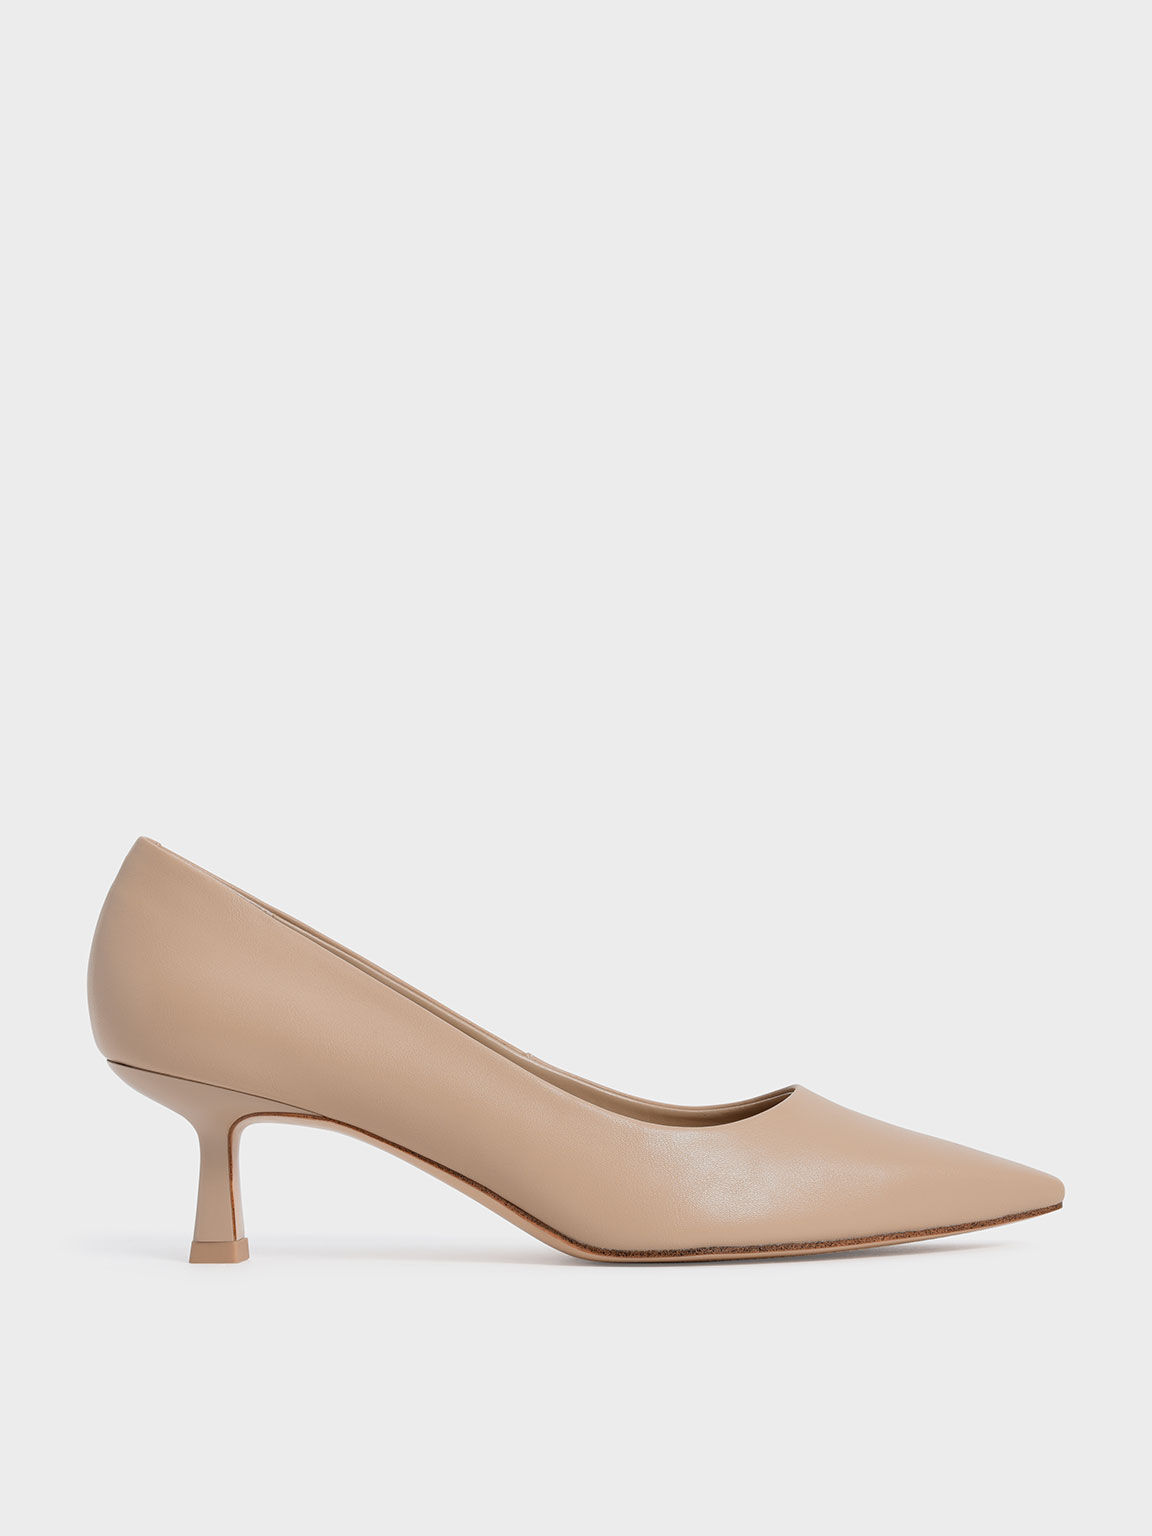 Nude Emmy Pointed Kitten Heel Pumps - CHARLES & KEITH